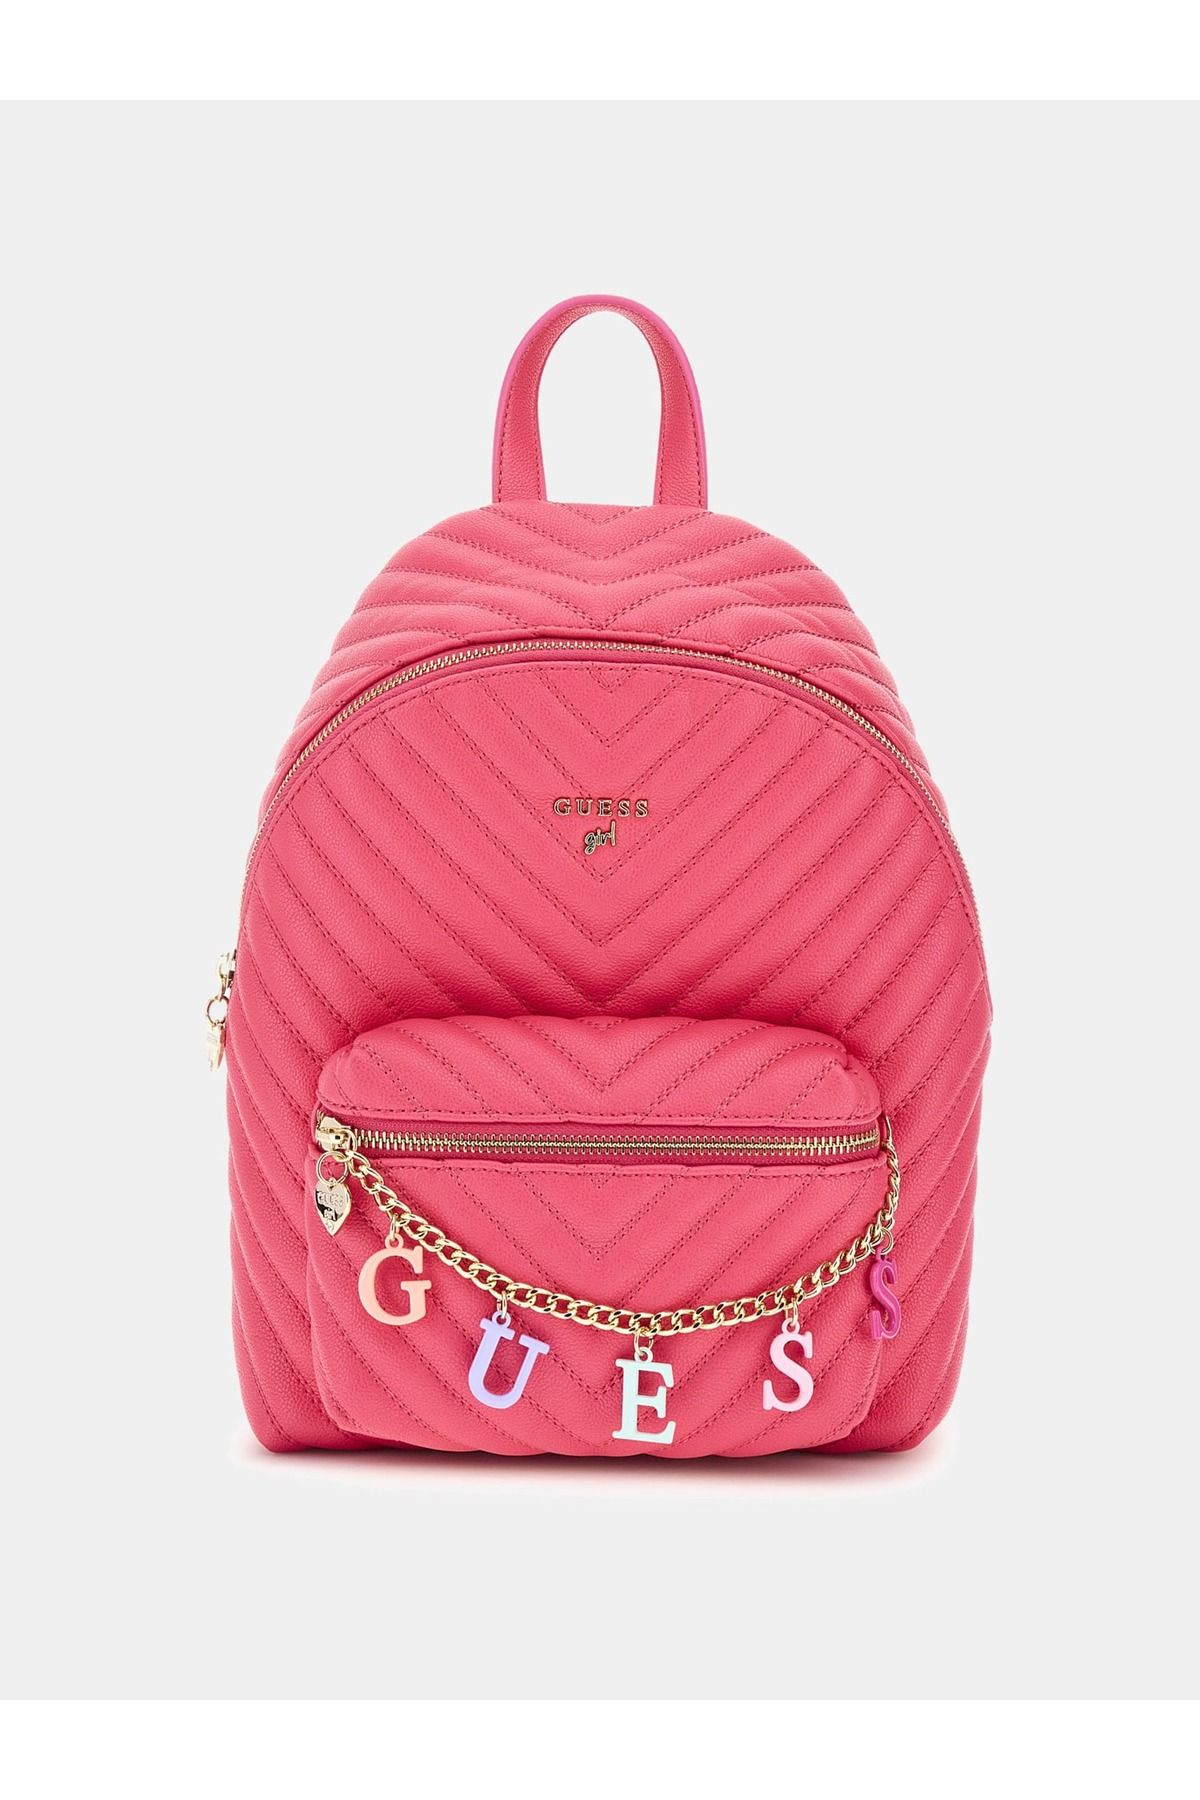 Guess SMALL BACKPACK